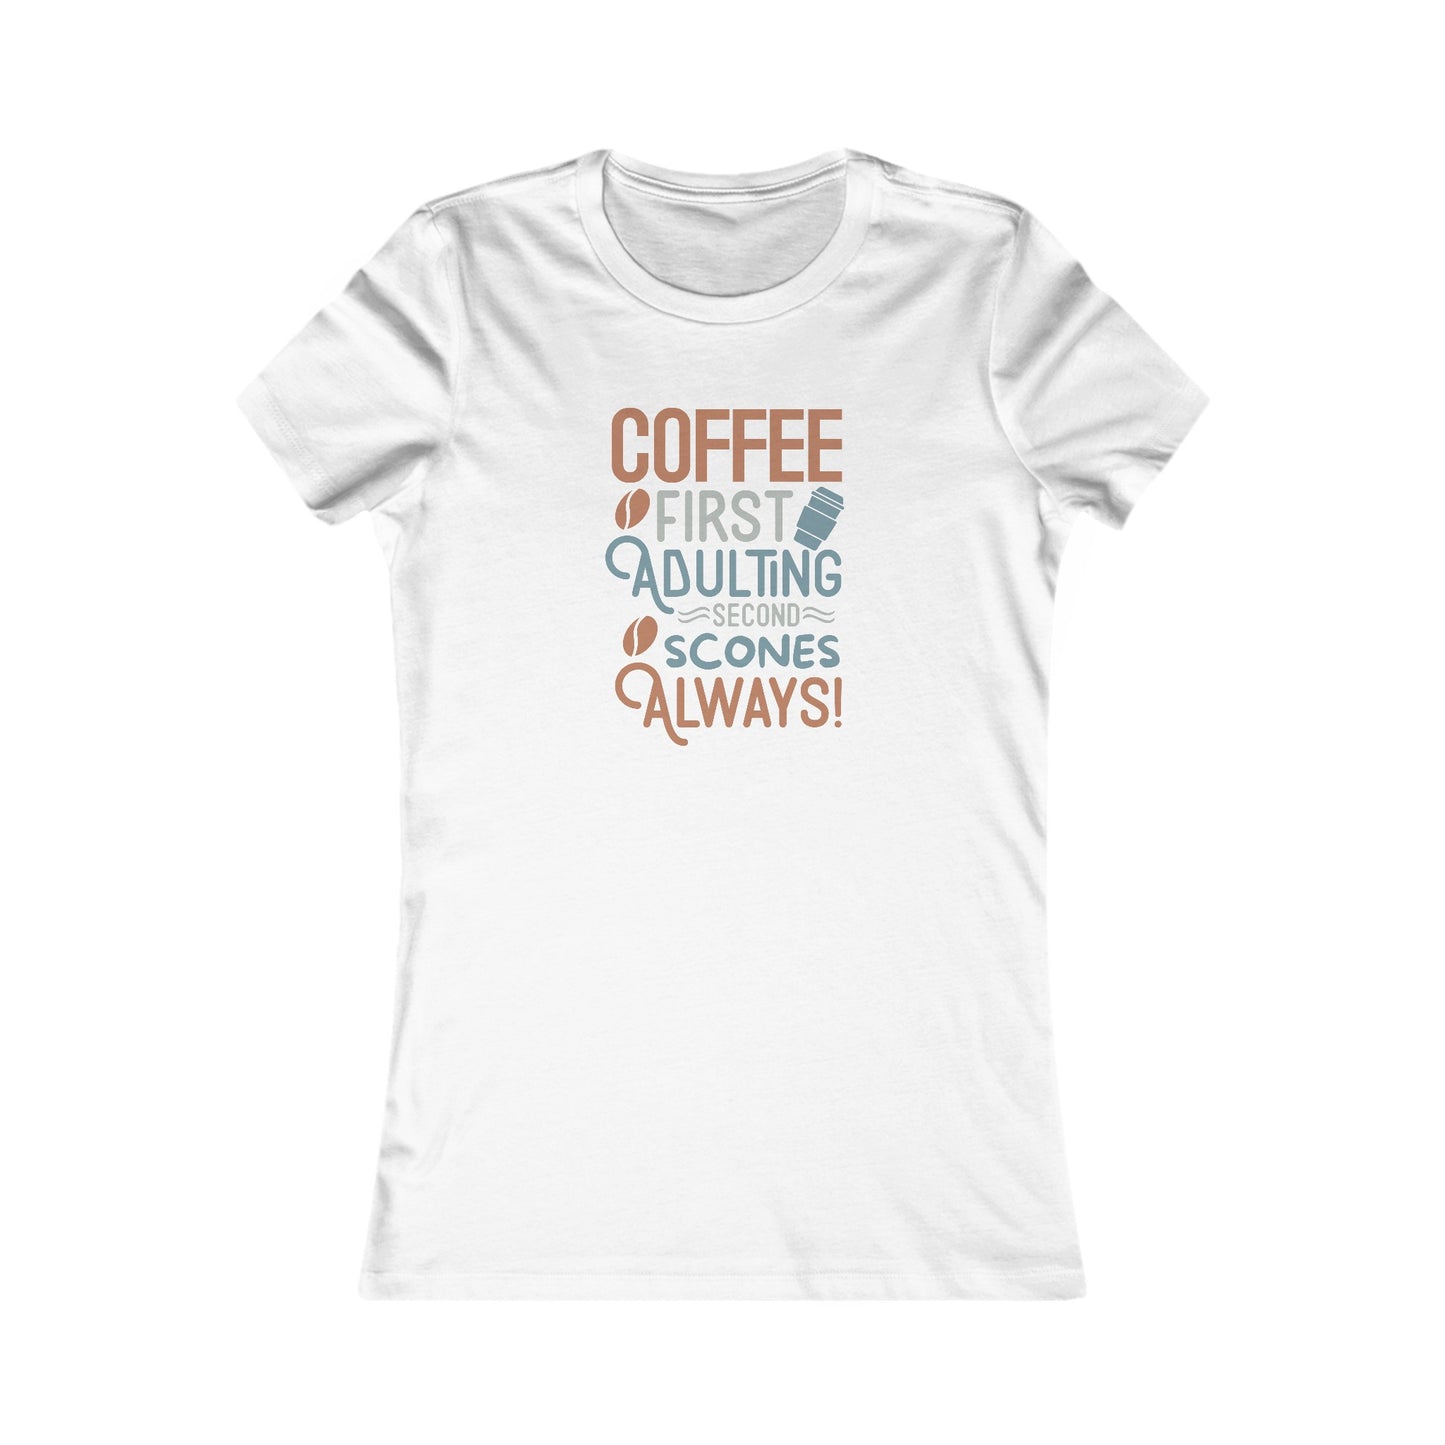 Coffee First Adulting Second Scones Always Women's T-Shirt